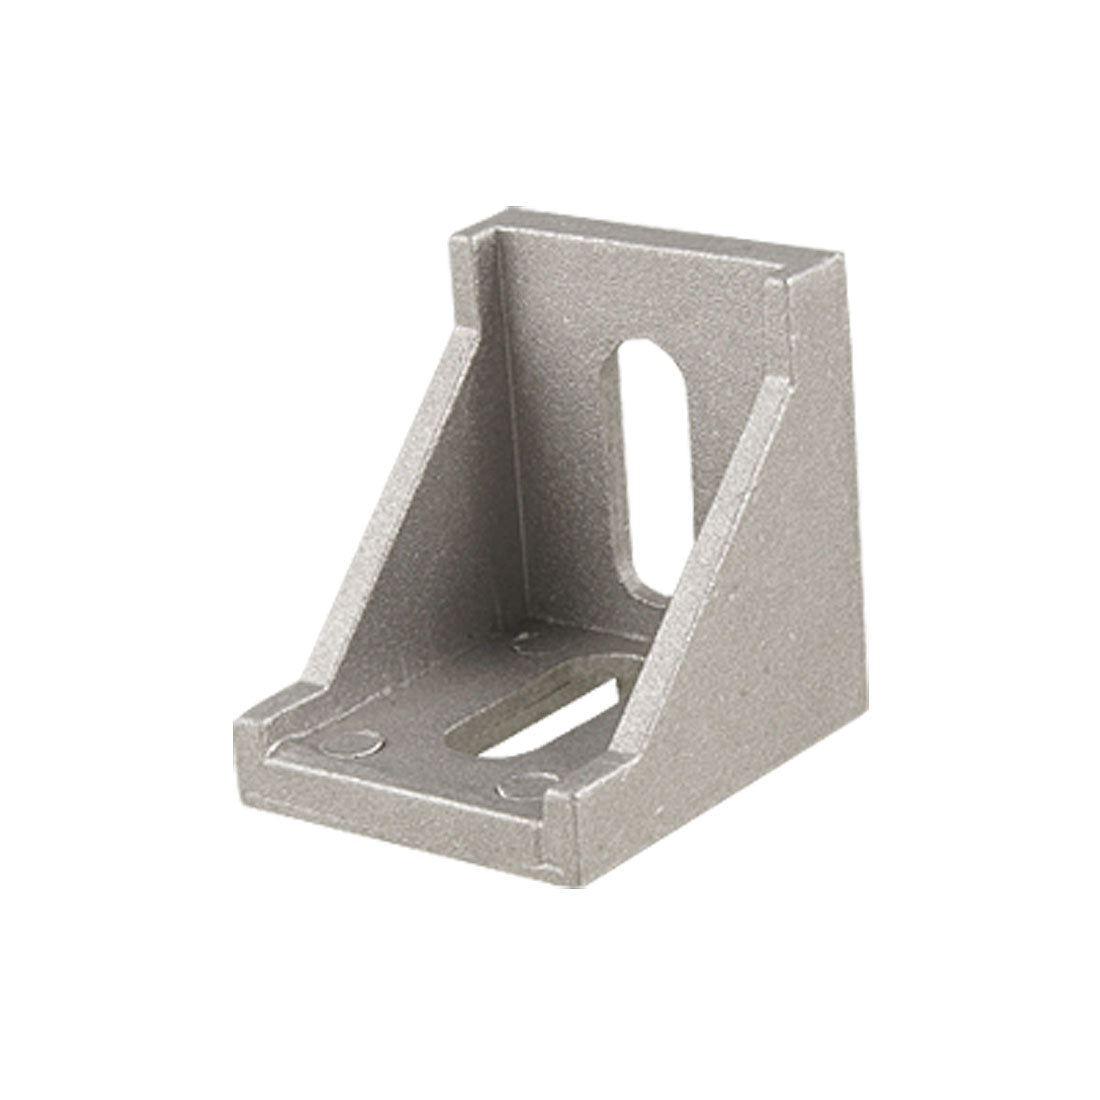 uxcell Uxcell Furniture Door Fastener 90 Degree Alloy Angle Bracket Silver Tone